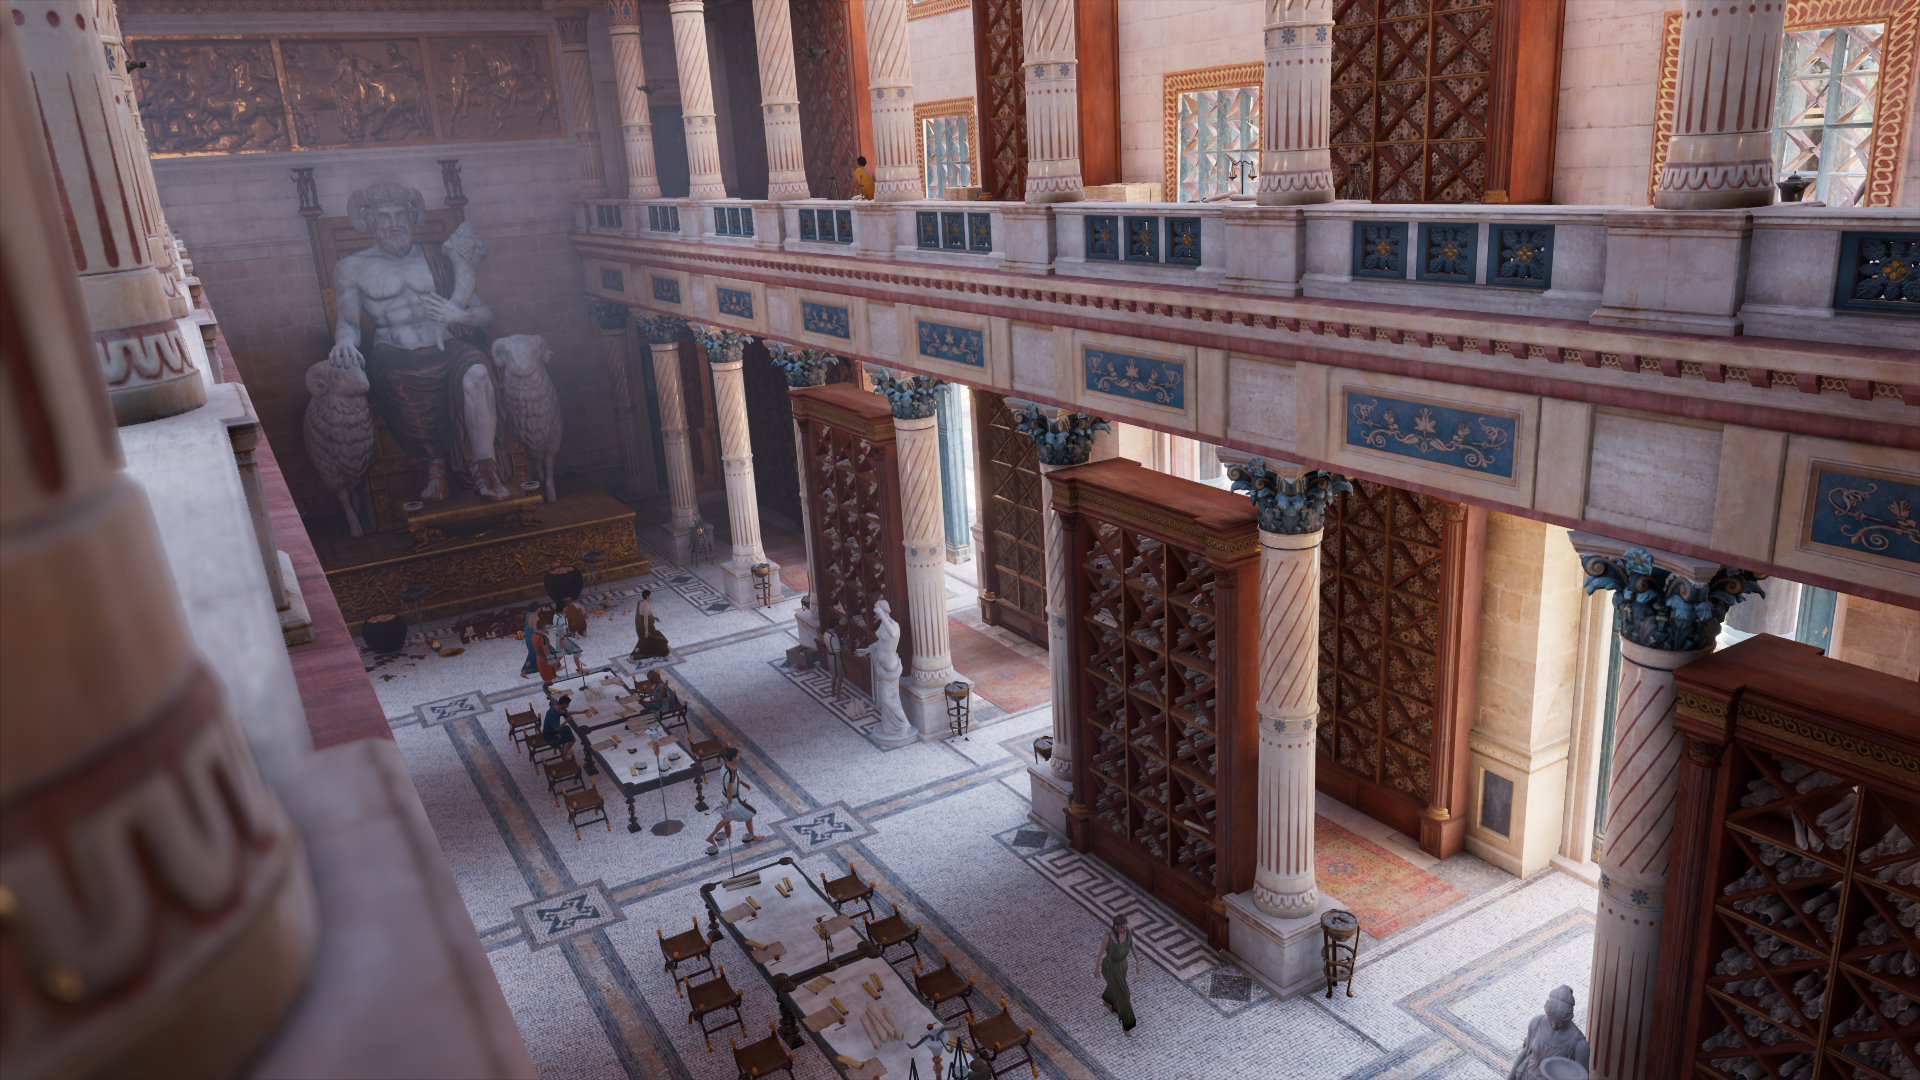 Assassin's Creed Origins: how Ubisoft painstakingly recreated ancient Egypt, Assassin's Creed